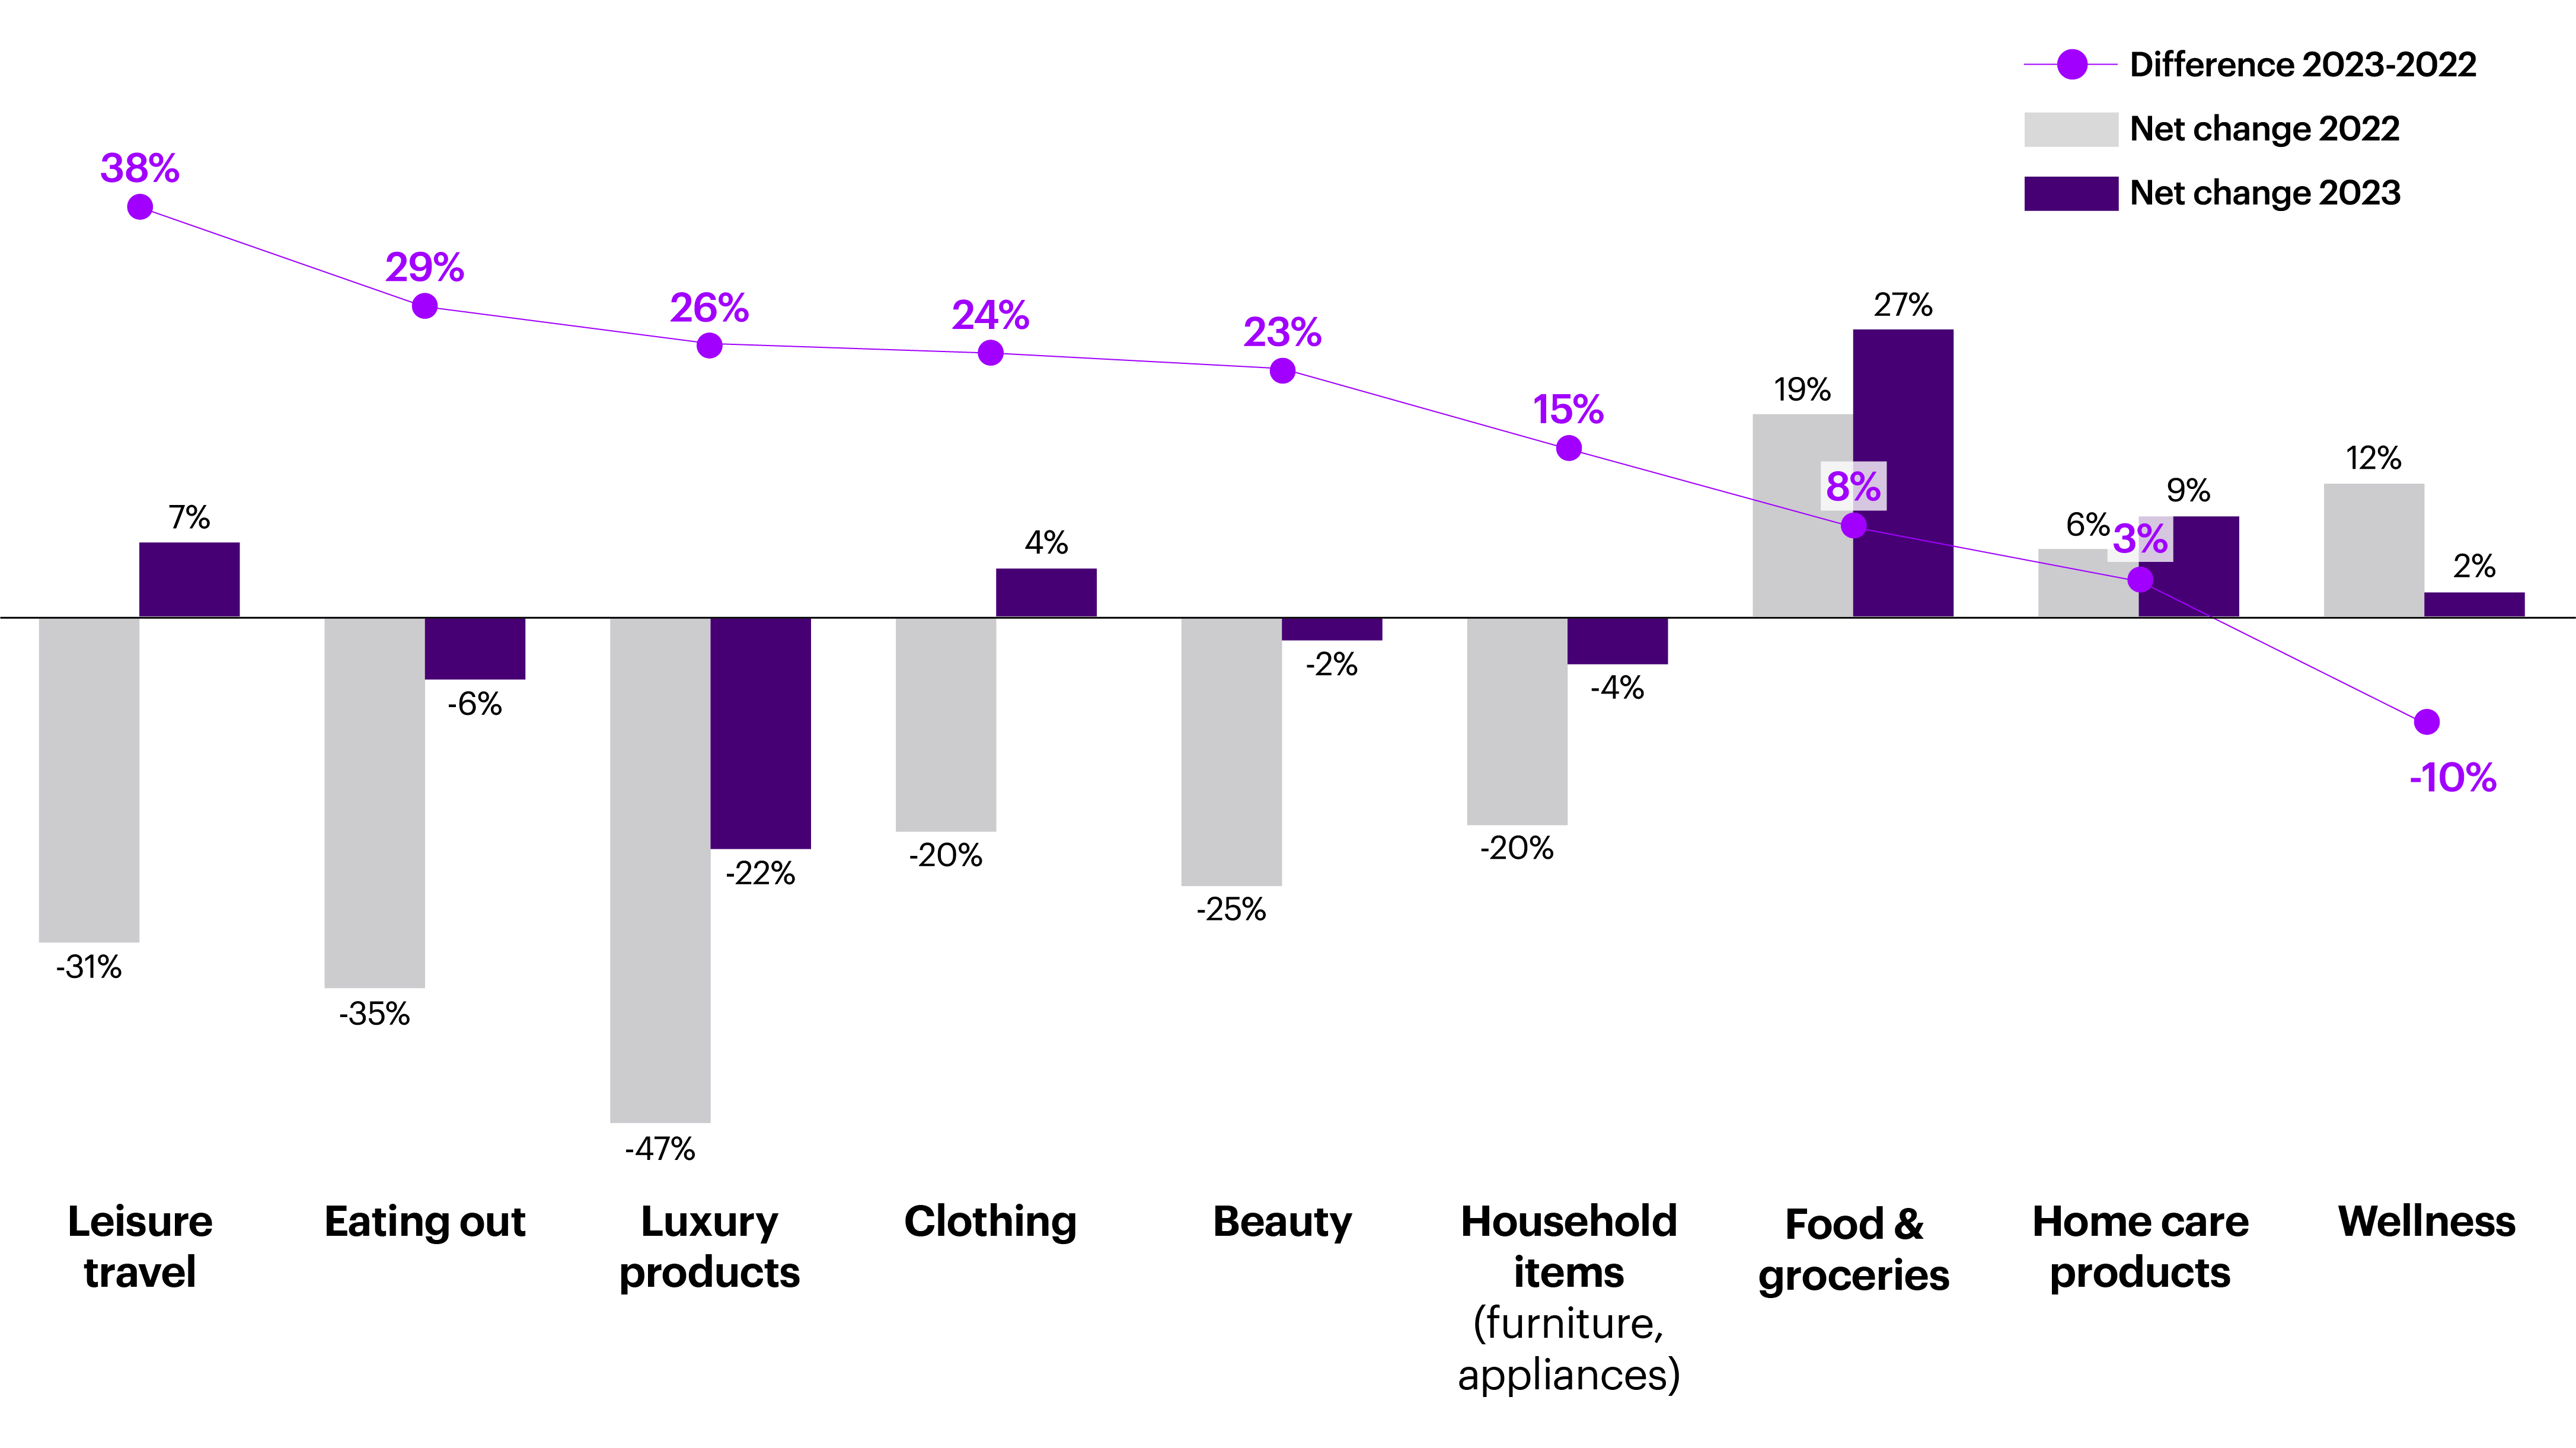 Amid an Era of Volatility “The Resilient Consumer” is Adapting to Change, Accenture Survey Finds — Source: Accenture